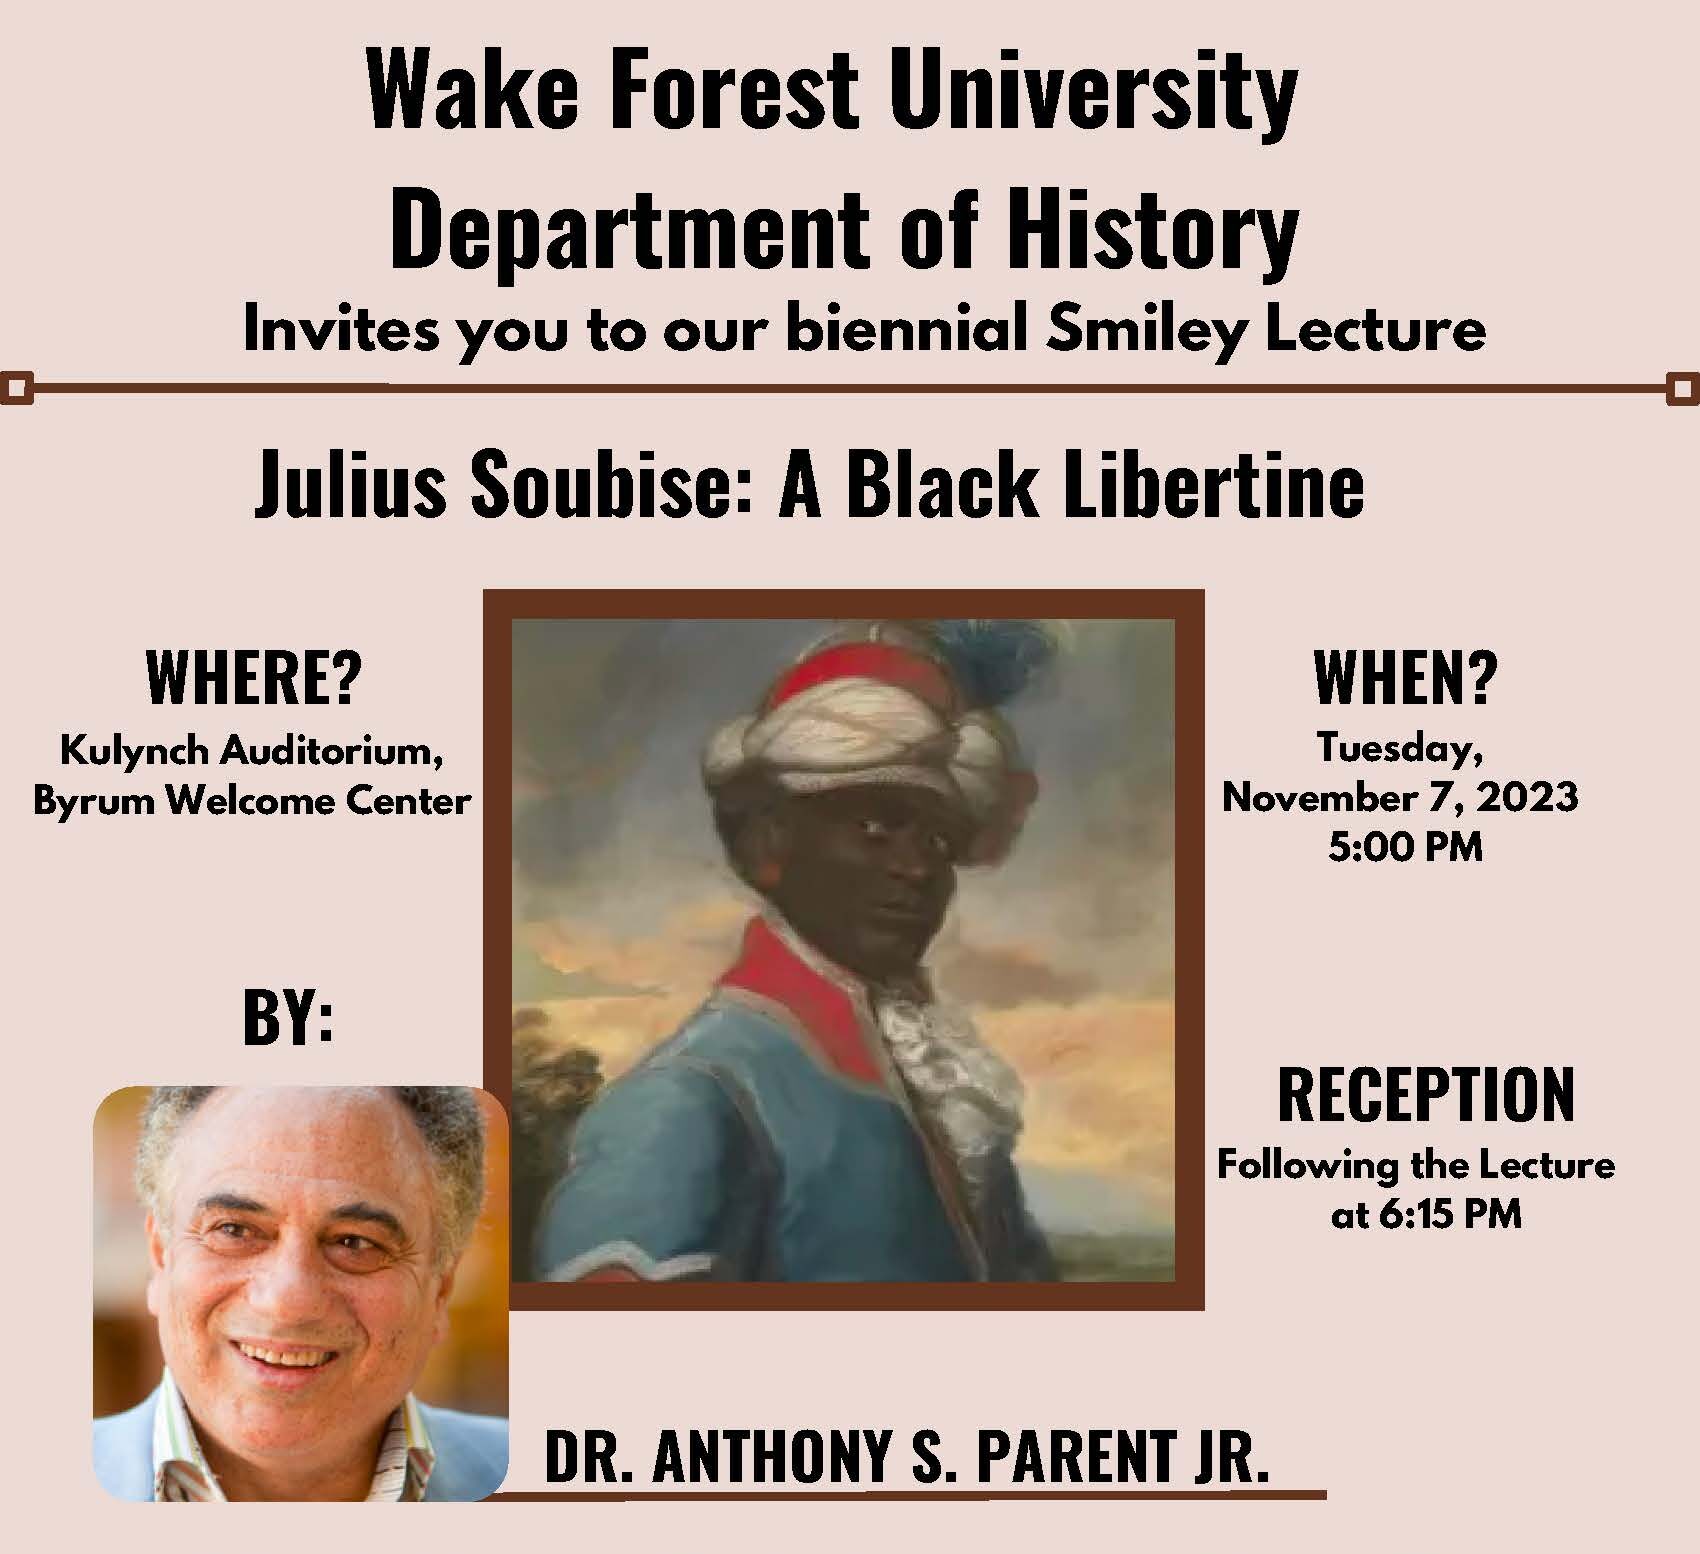 Event poster for "Julius Soubise: A Black Libertine." Event details are replicated in this post. Poster images include a headshot of Dr. Parent and the painting "Baron Nagell’s Running Footman ",c.1795, described on the Tate museum website as "a half-length portrait in pastel by the artist Ozias Humphry showing a black man dressed in a vividly coloured livery with elaborate, feathered head-gear. The subject is turned towards the viewer, with trees to the left of him and a low, open, but undistinguishable landscape and distant blue hills beyond. He wears a bright blue and red tunic and a voluminous white ruffled shirt. His towering headpiece consists of a red cap trimmed with silver braid with a turban-like band of white silk around it, crowned with red, white and blue feathers."